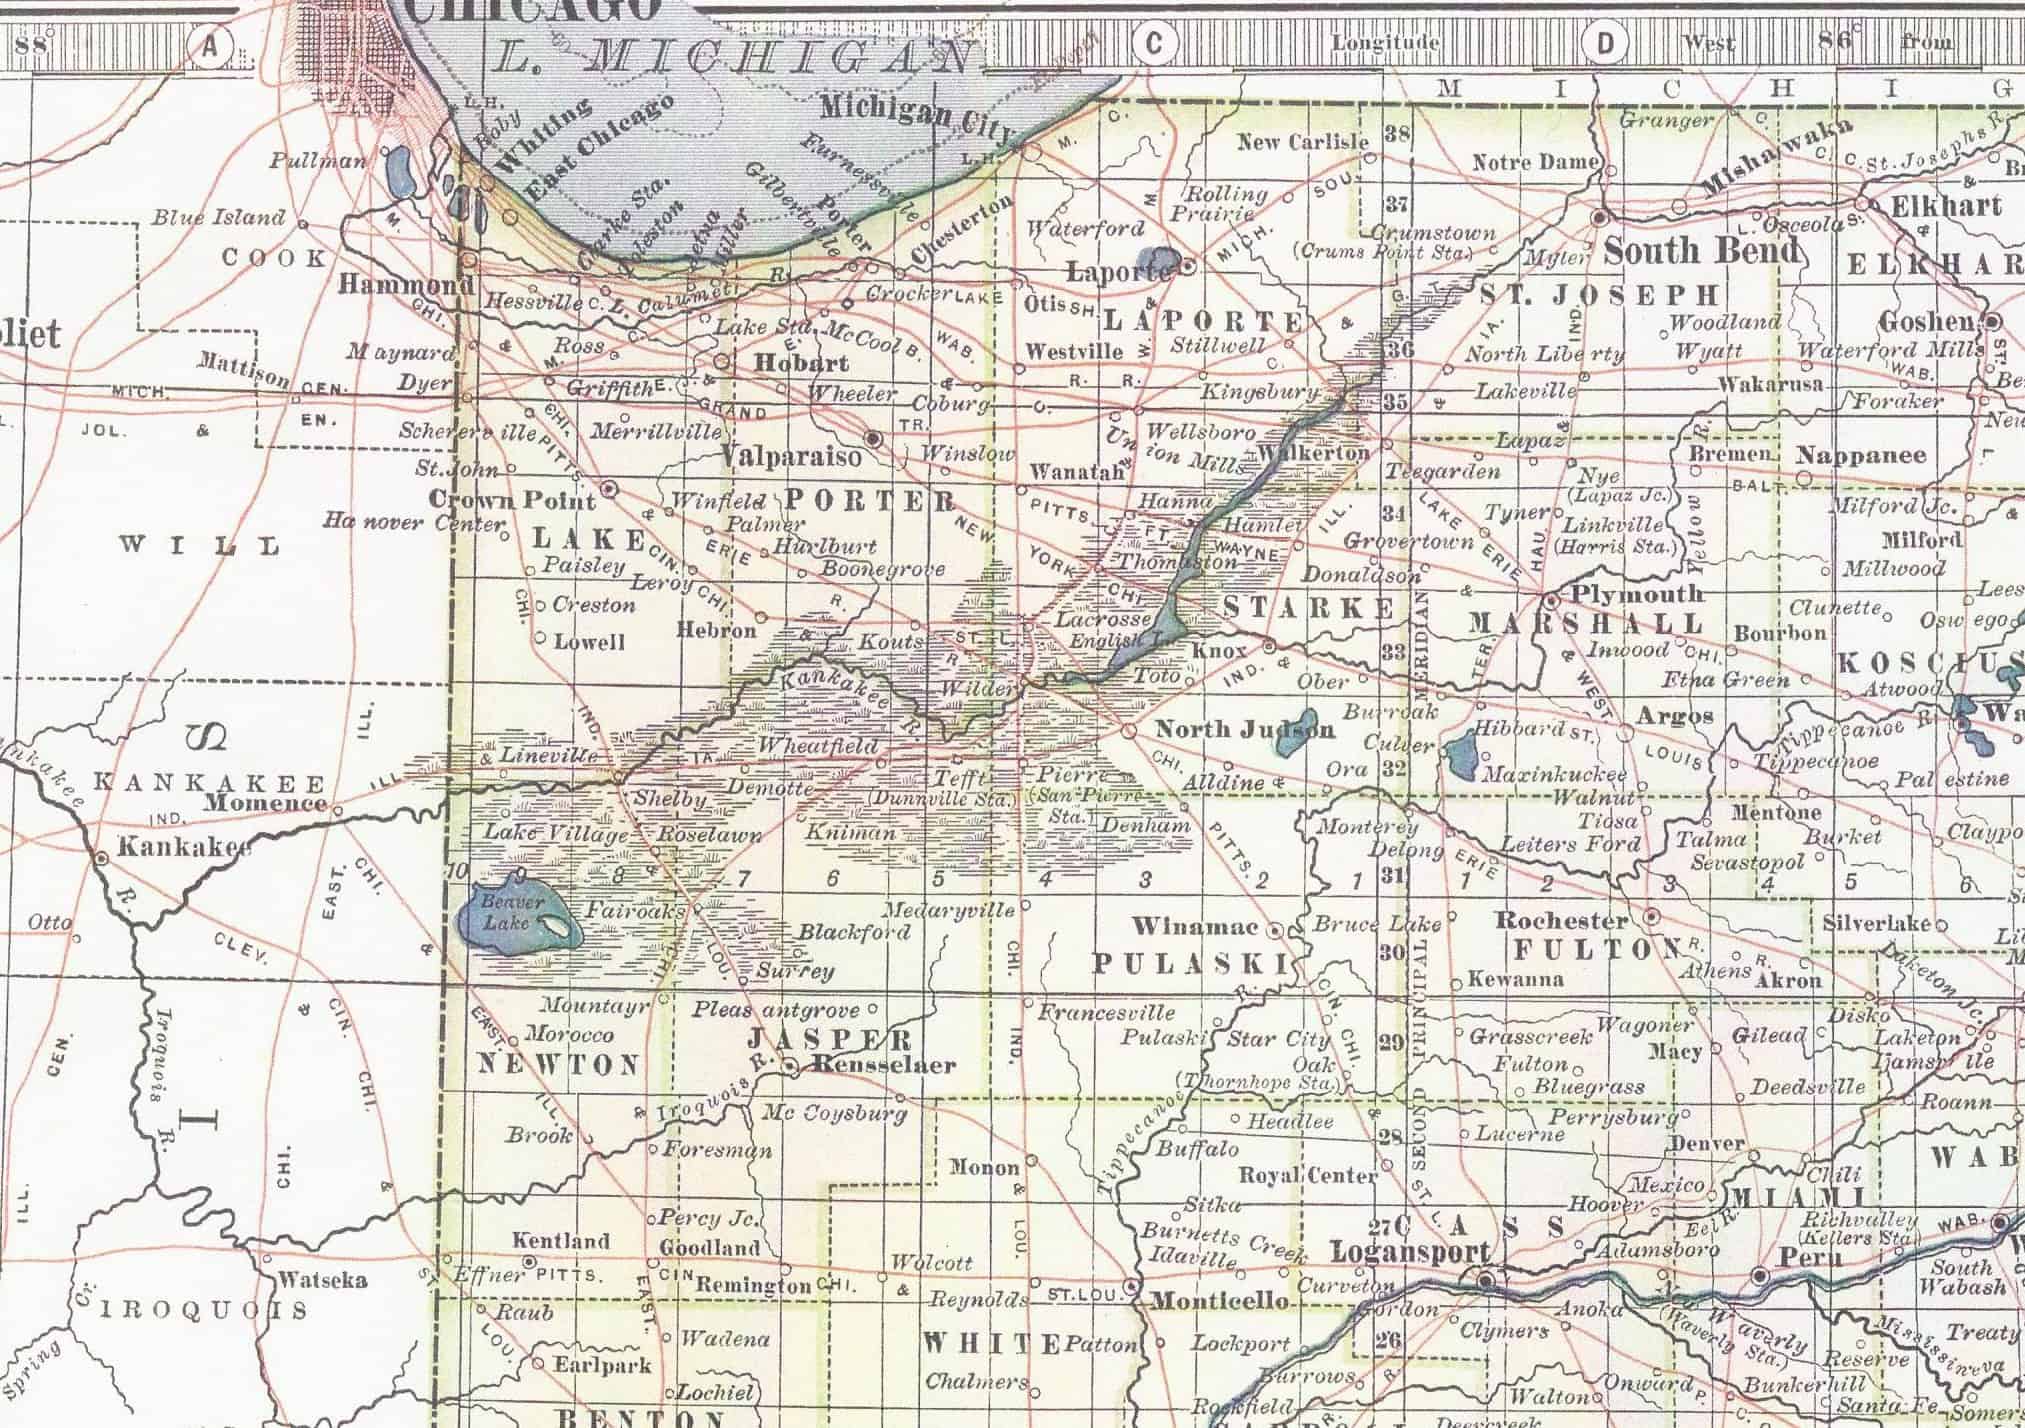 An old map of Indiana shows the Grand Kankakee Marsh, known as the Everglades of the North. The marsh stretches 90 miles from English Lake to the Illinois state line.